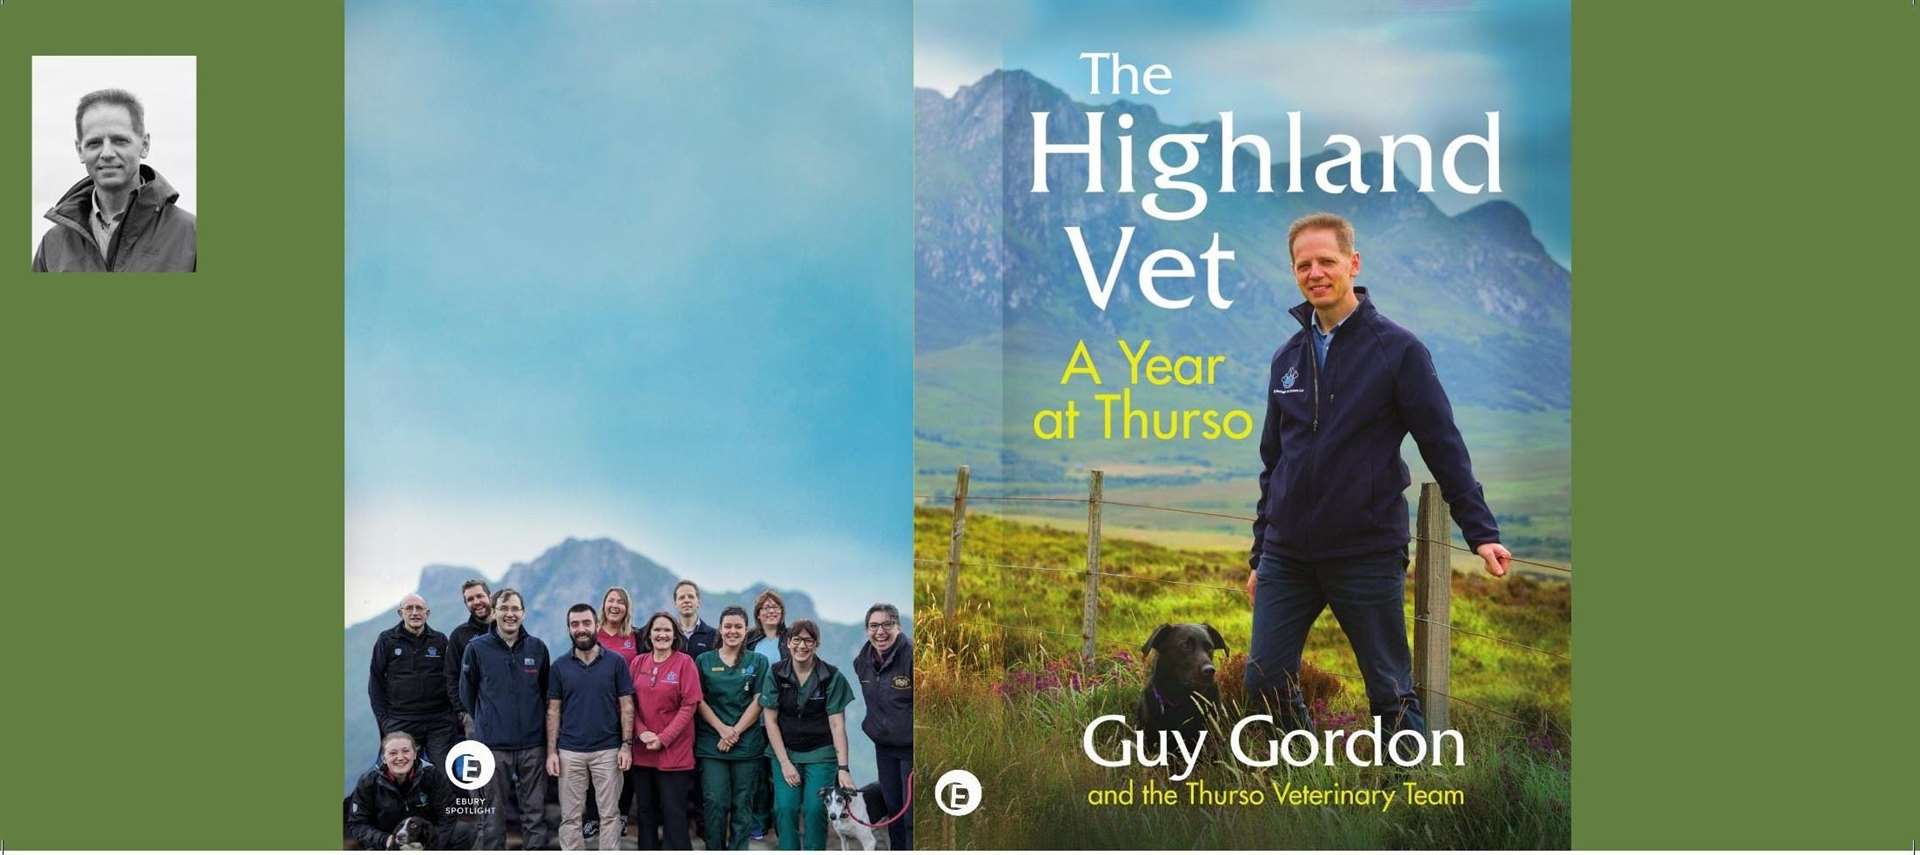 The Highland Vet book cover.